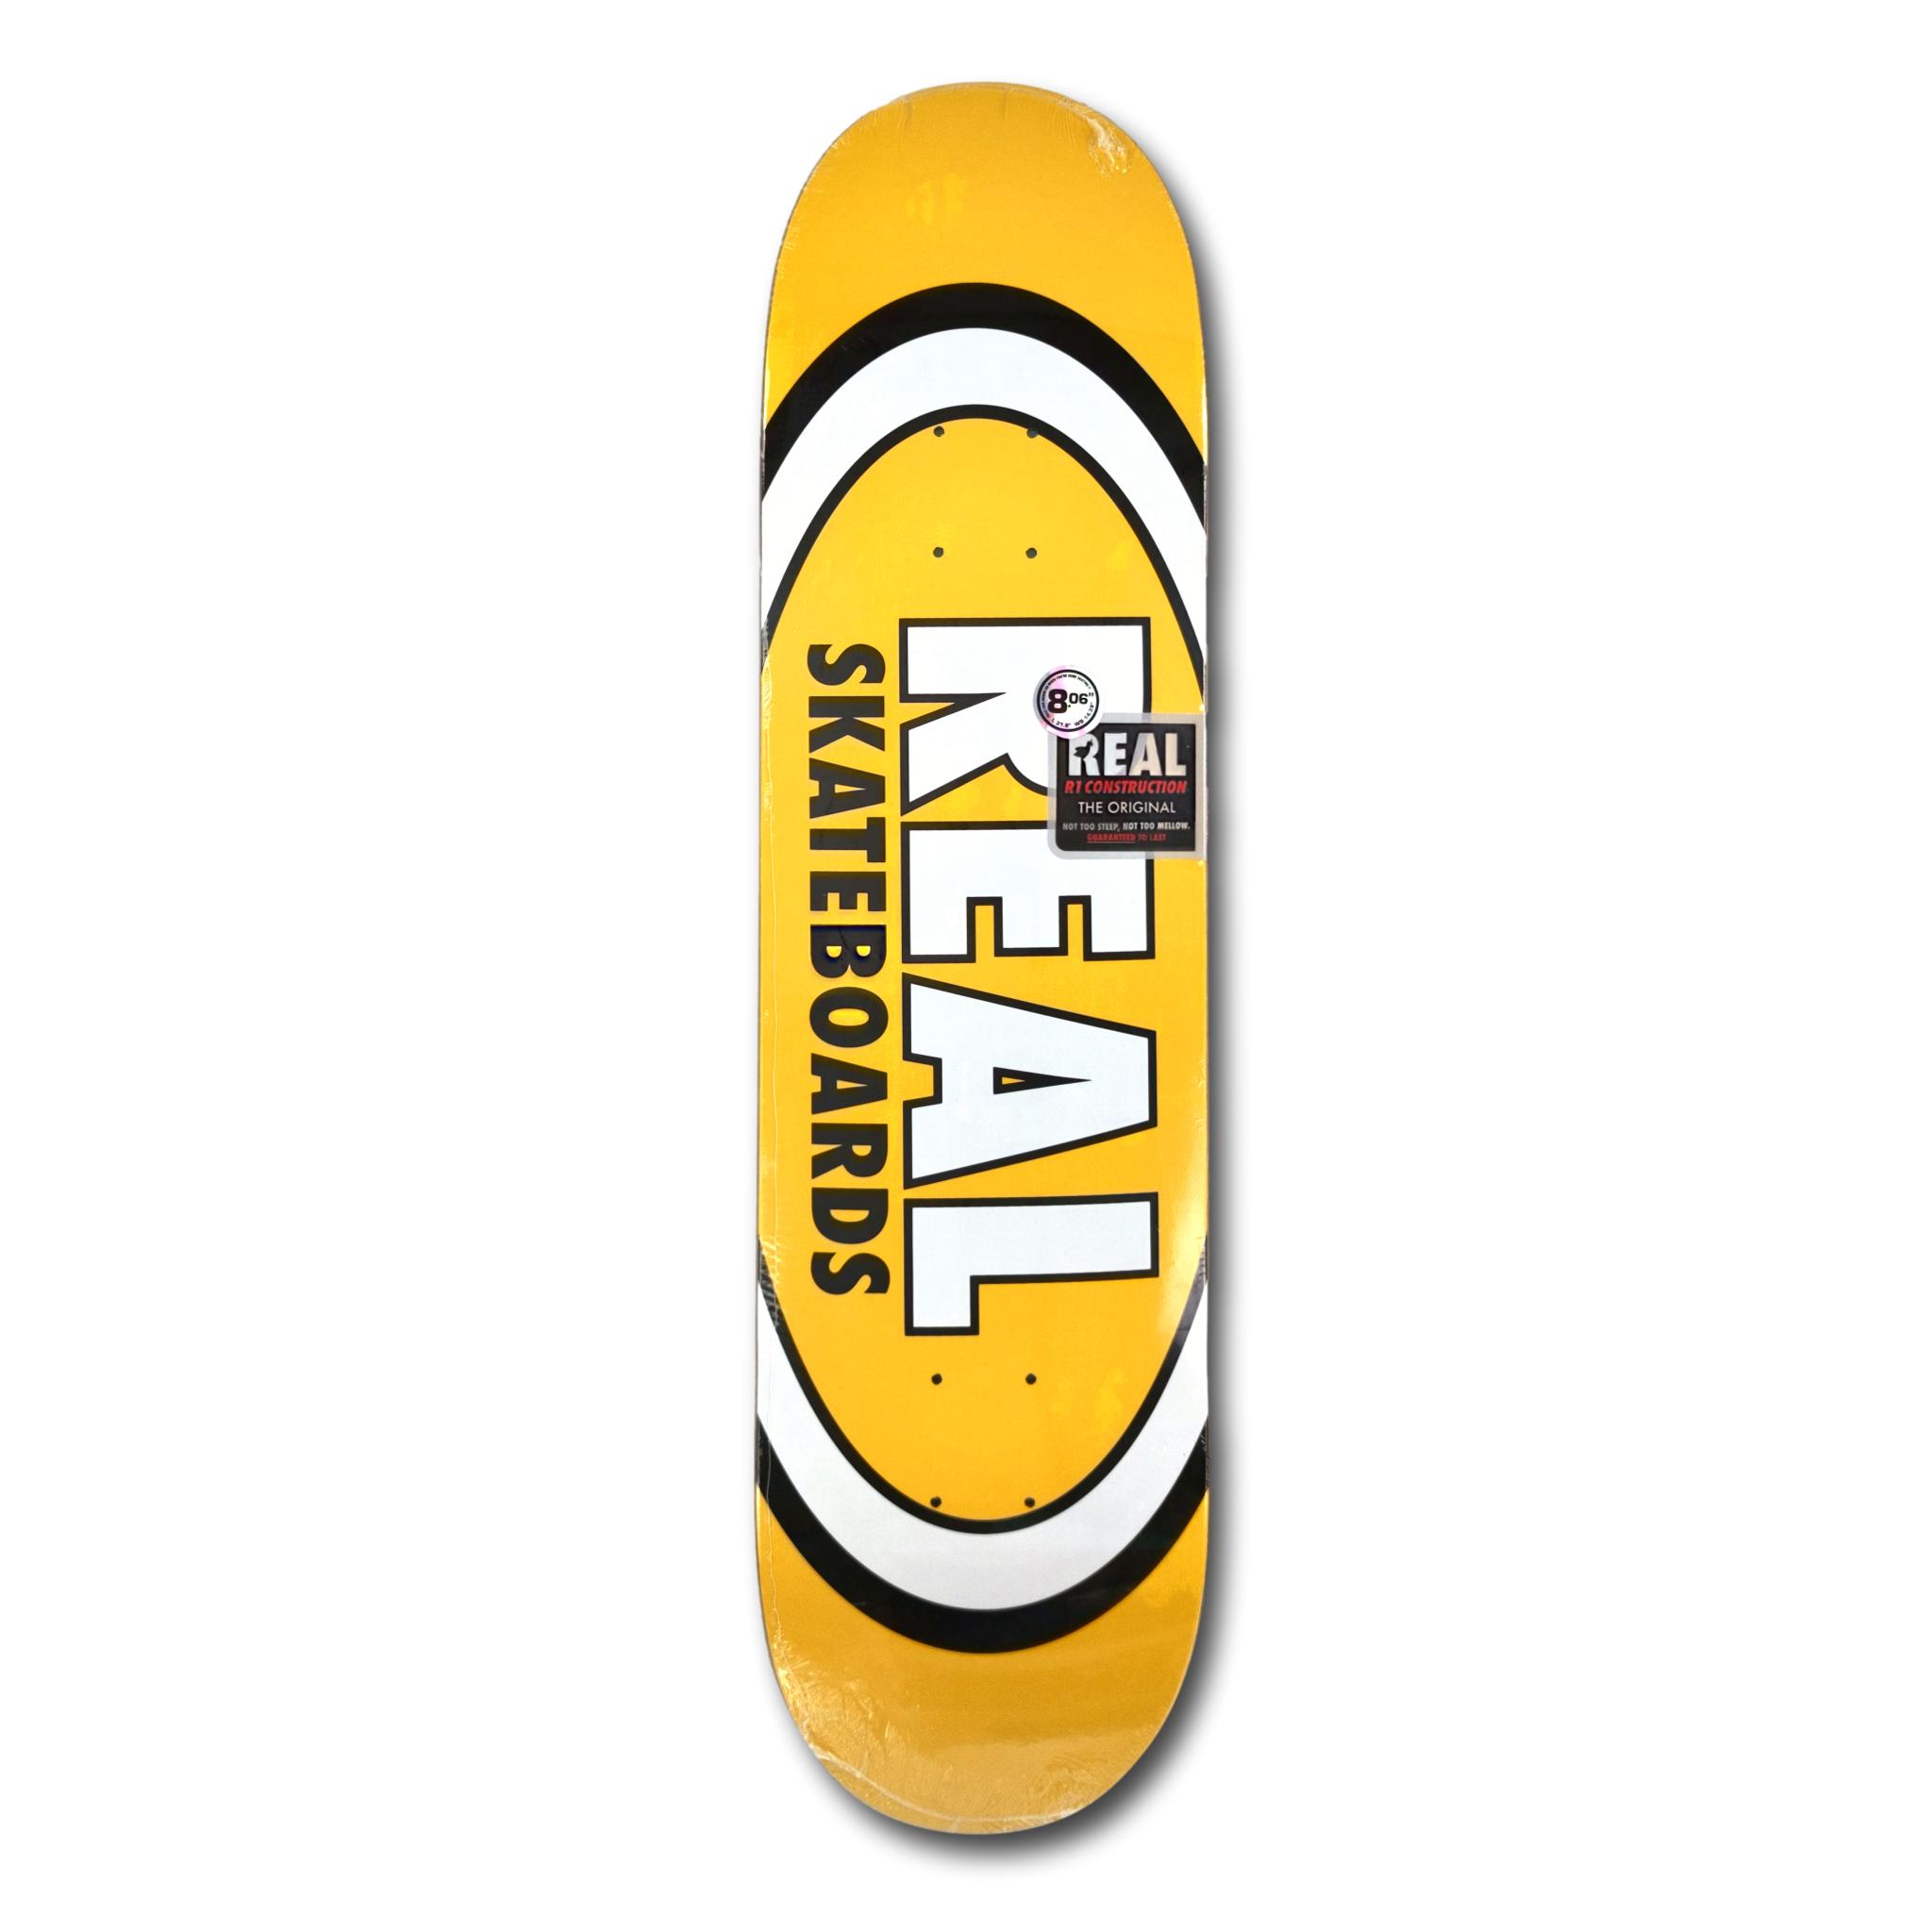 REAL SKATEBOARDS TEAM CLASSIC OVAL 8.06